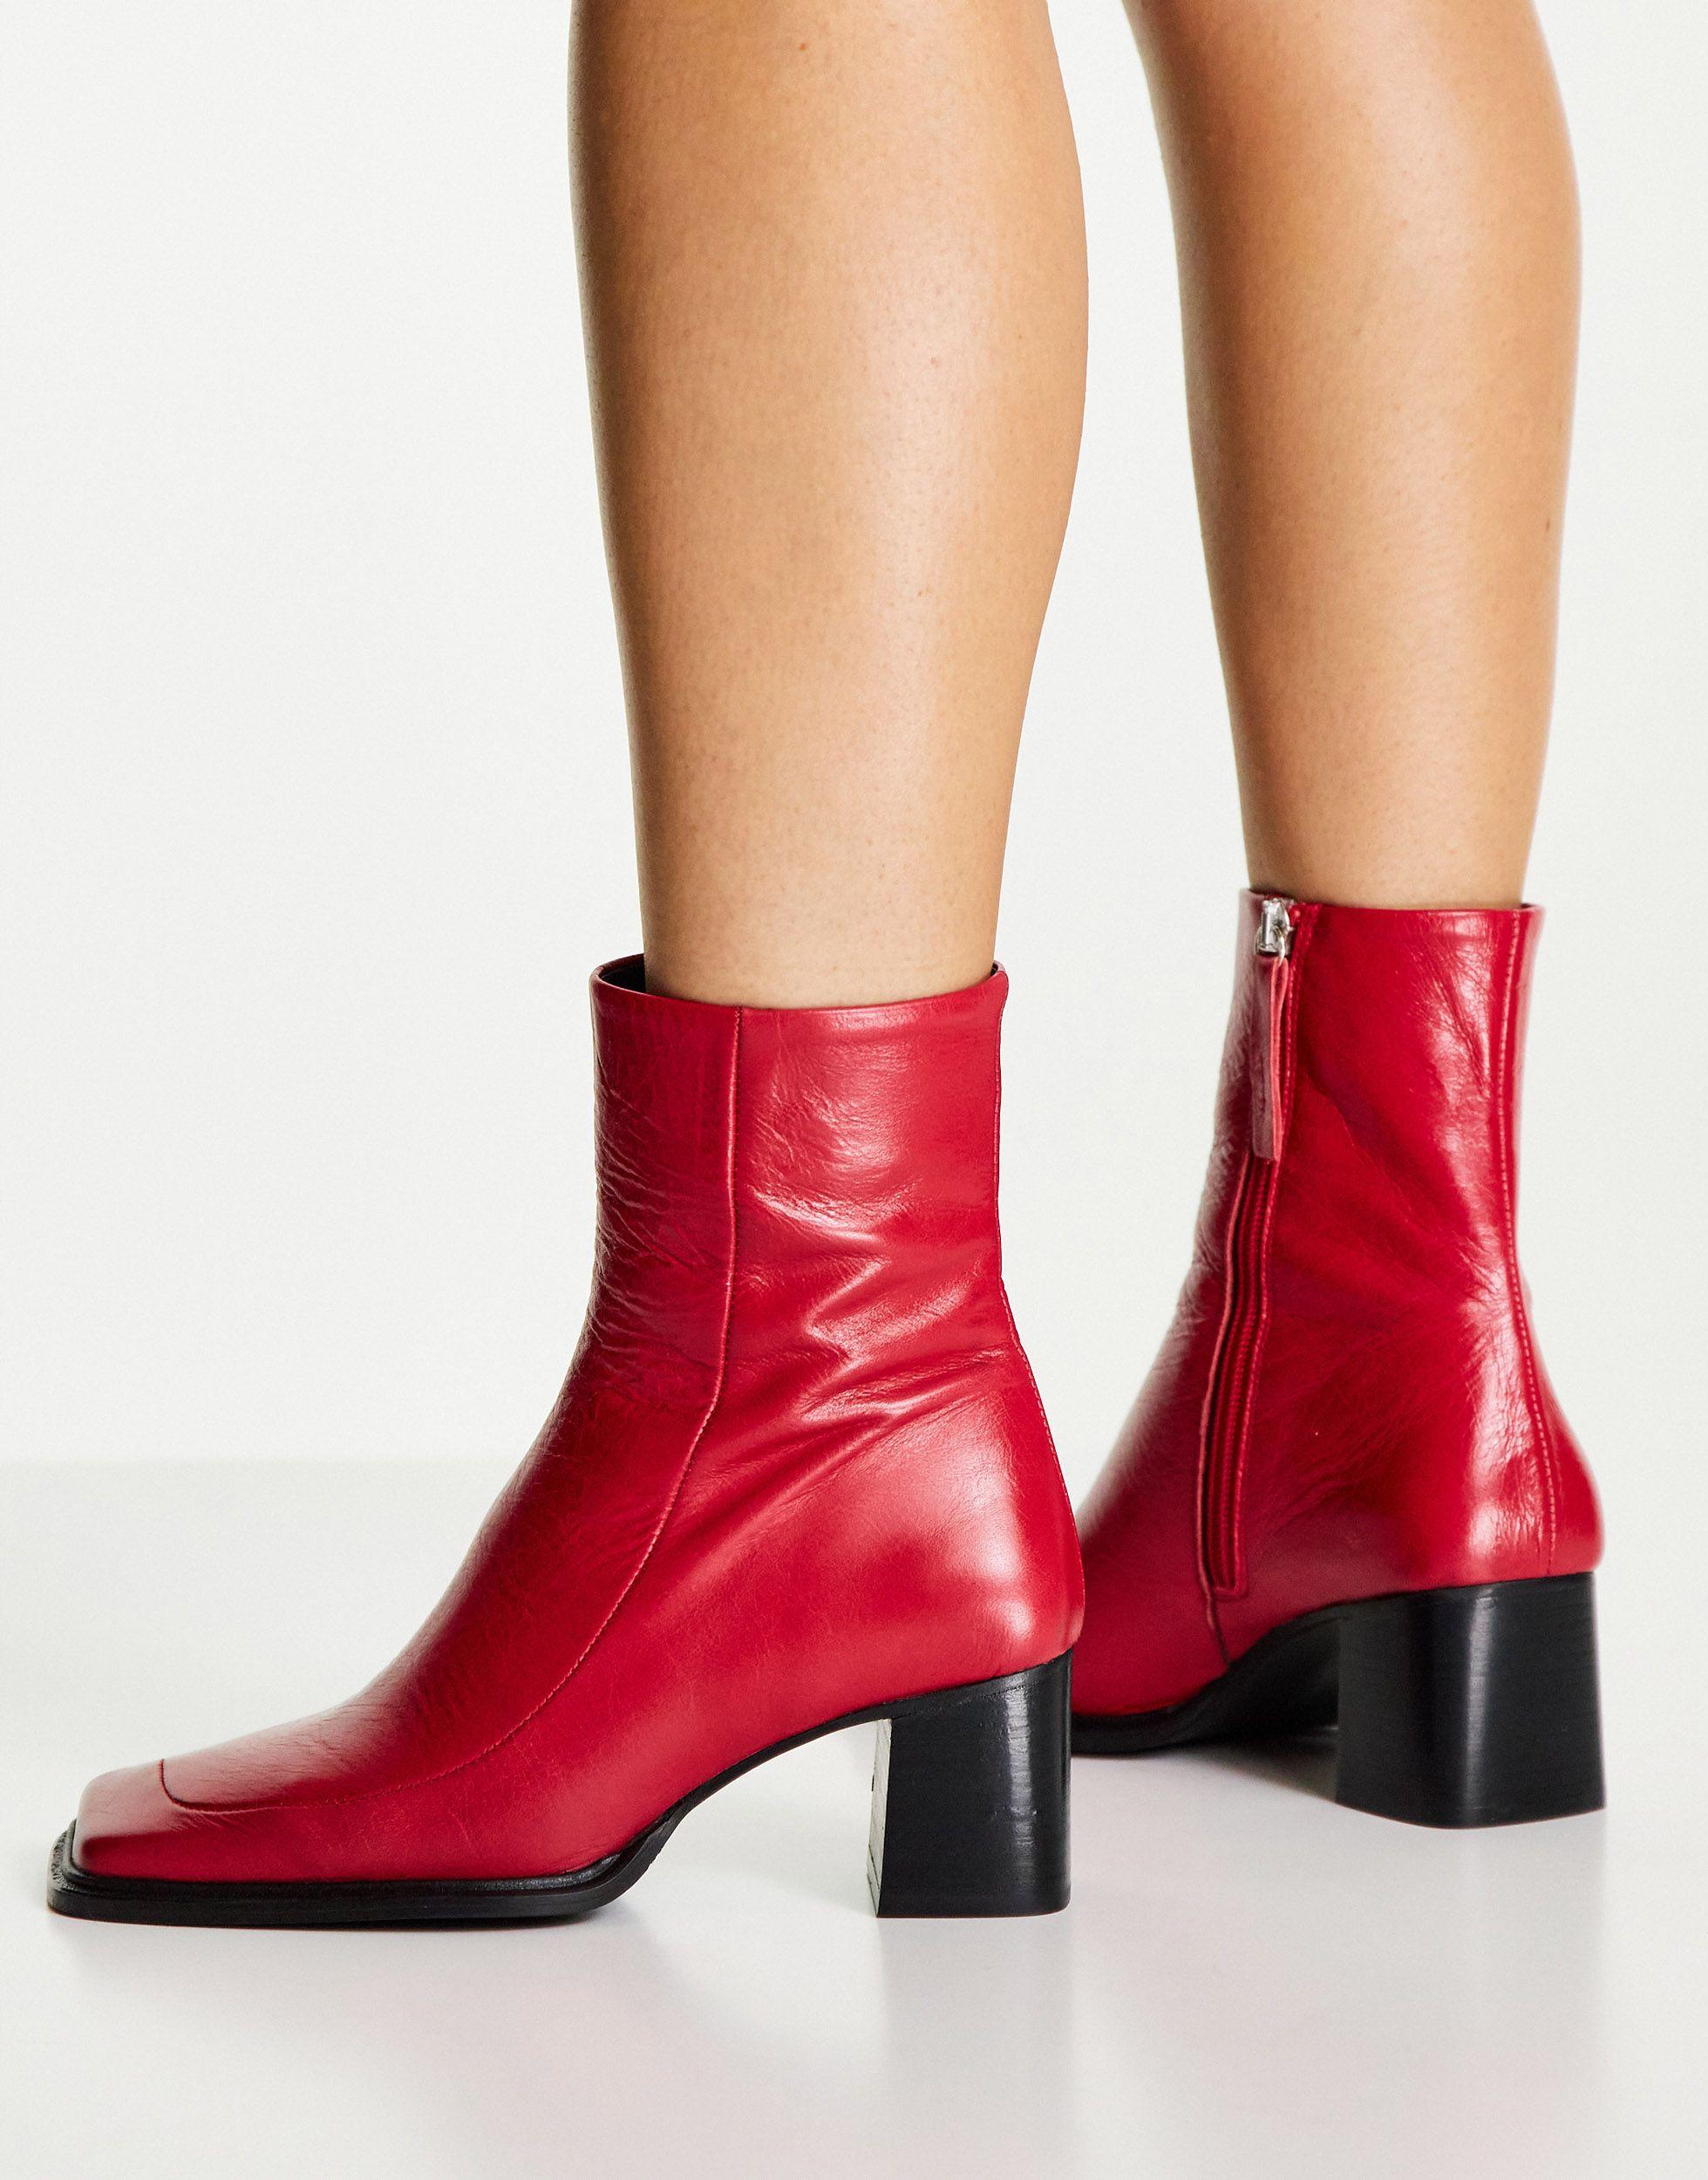 ASOS Roberta Premium Leather Square Toe Boots in Red | Lyst